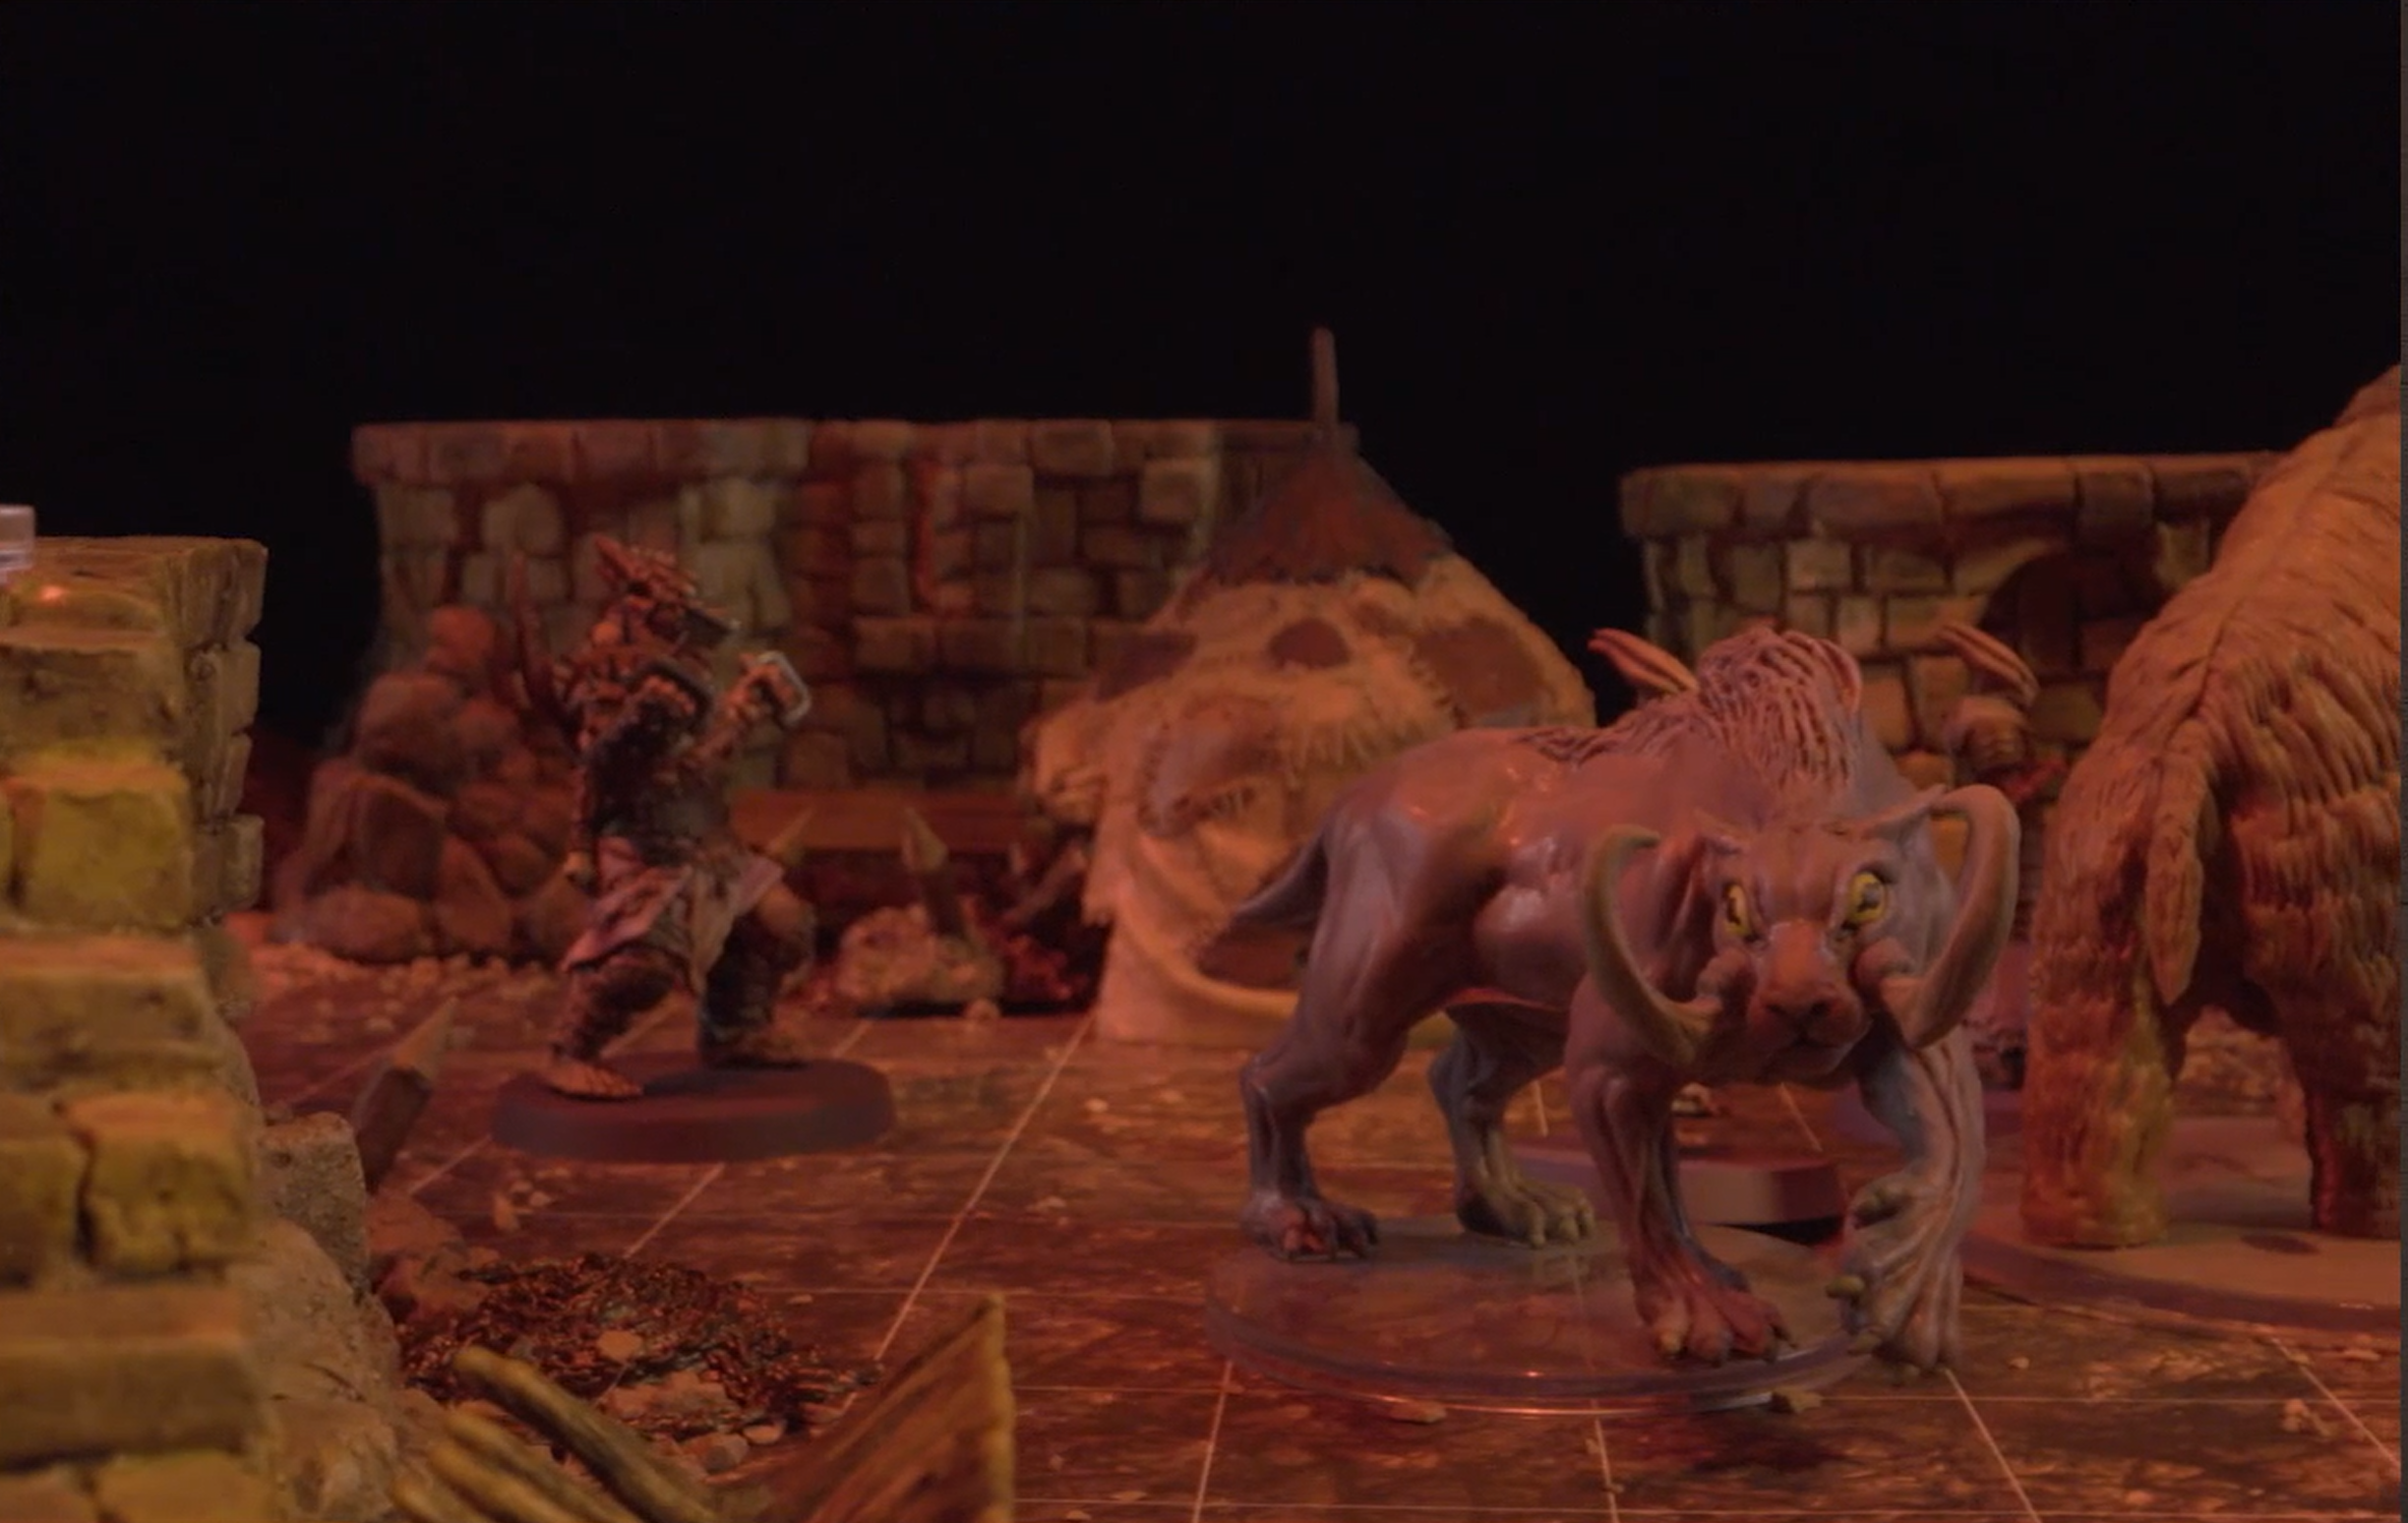 A tusked tiger-like creature facing the camera, with a wooly-mammoth-like creature next to it and a Reiloran behind it. The walls of buildings and a patchwork tent can be seen in the background.